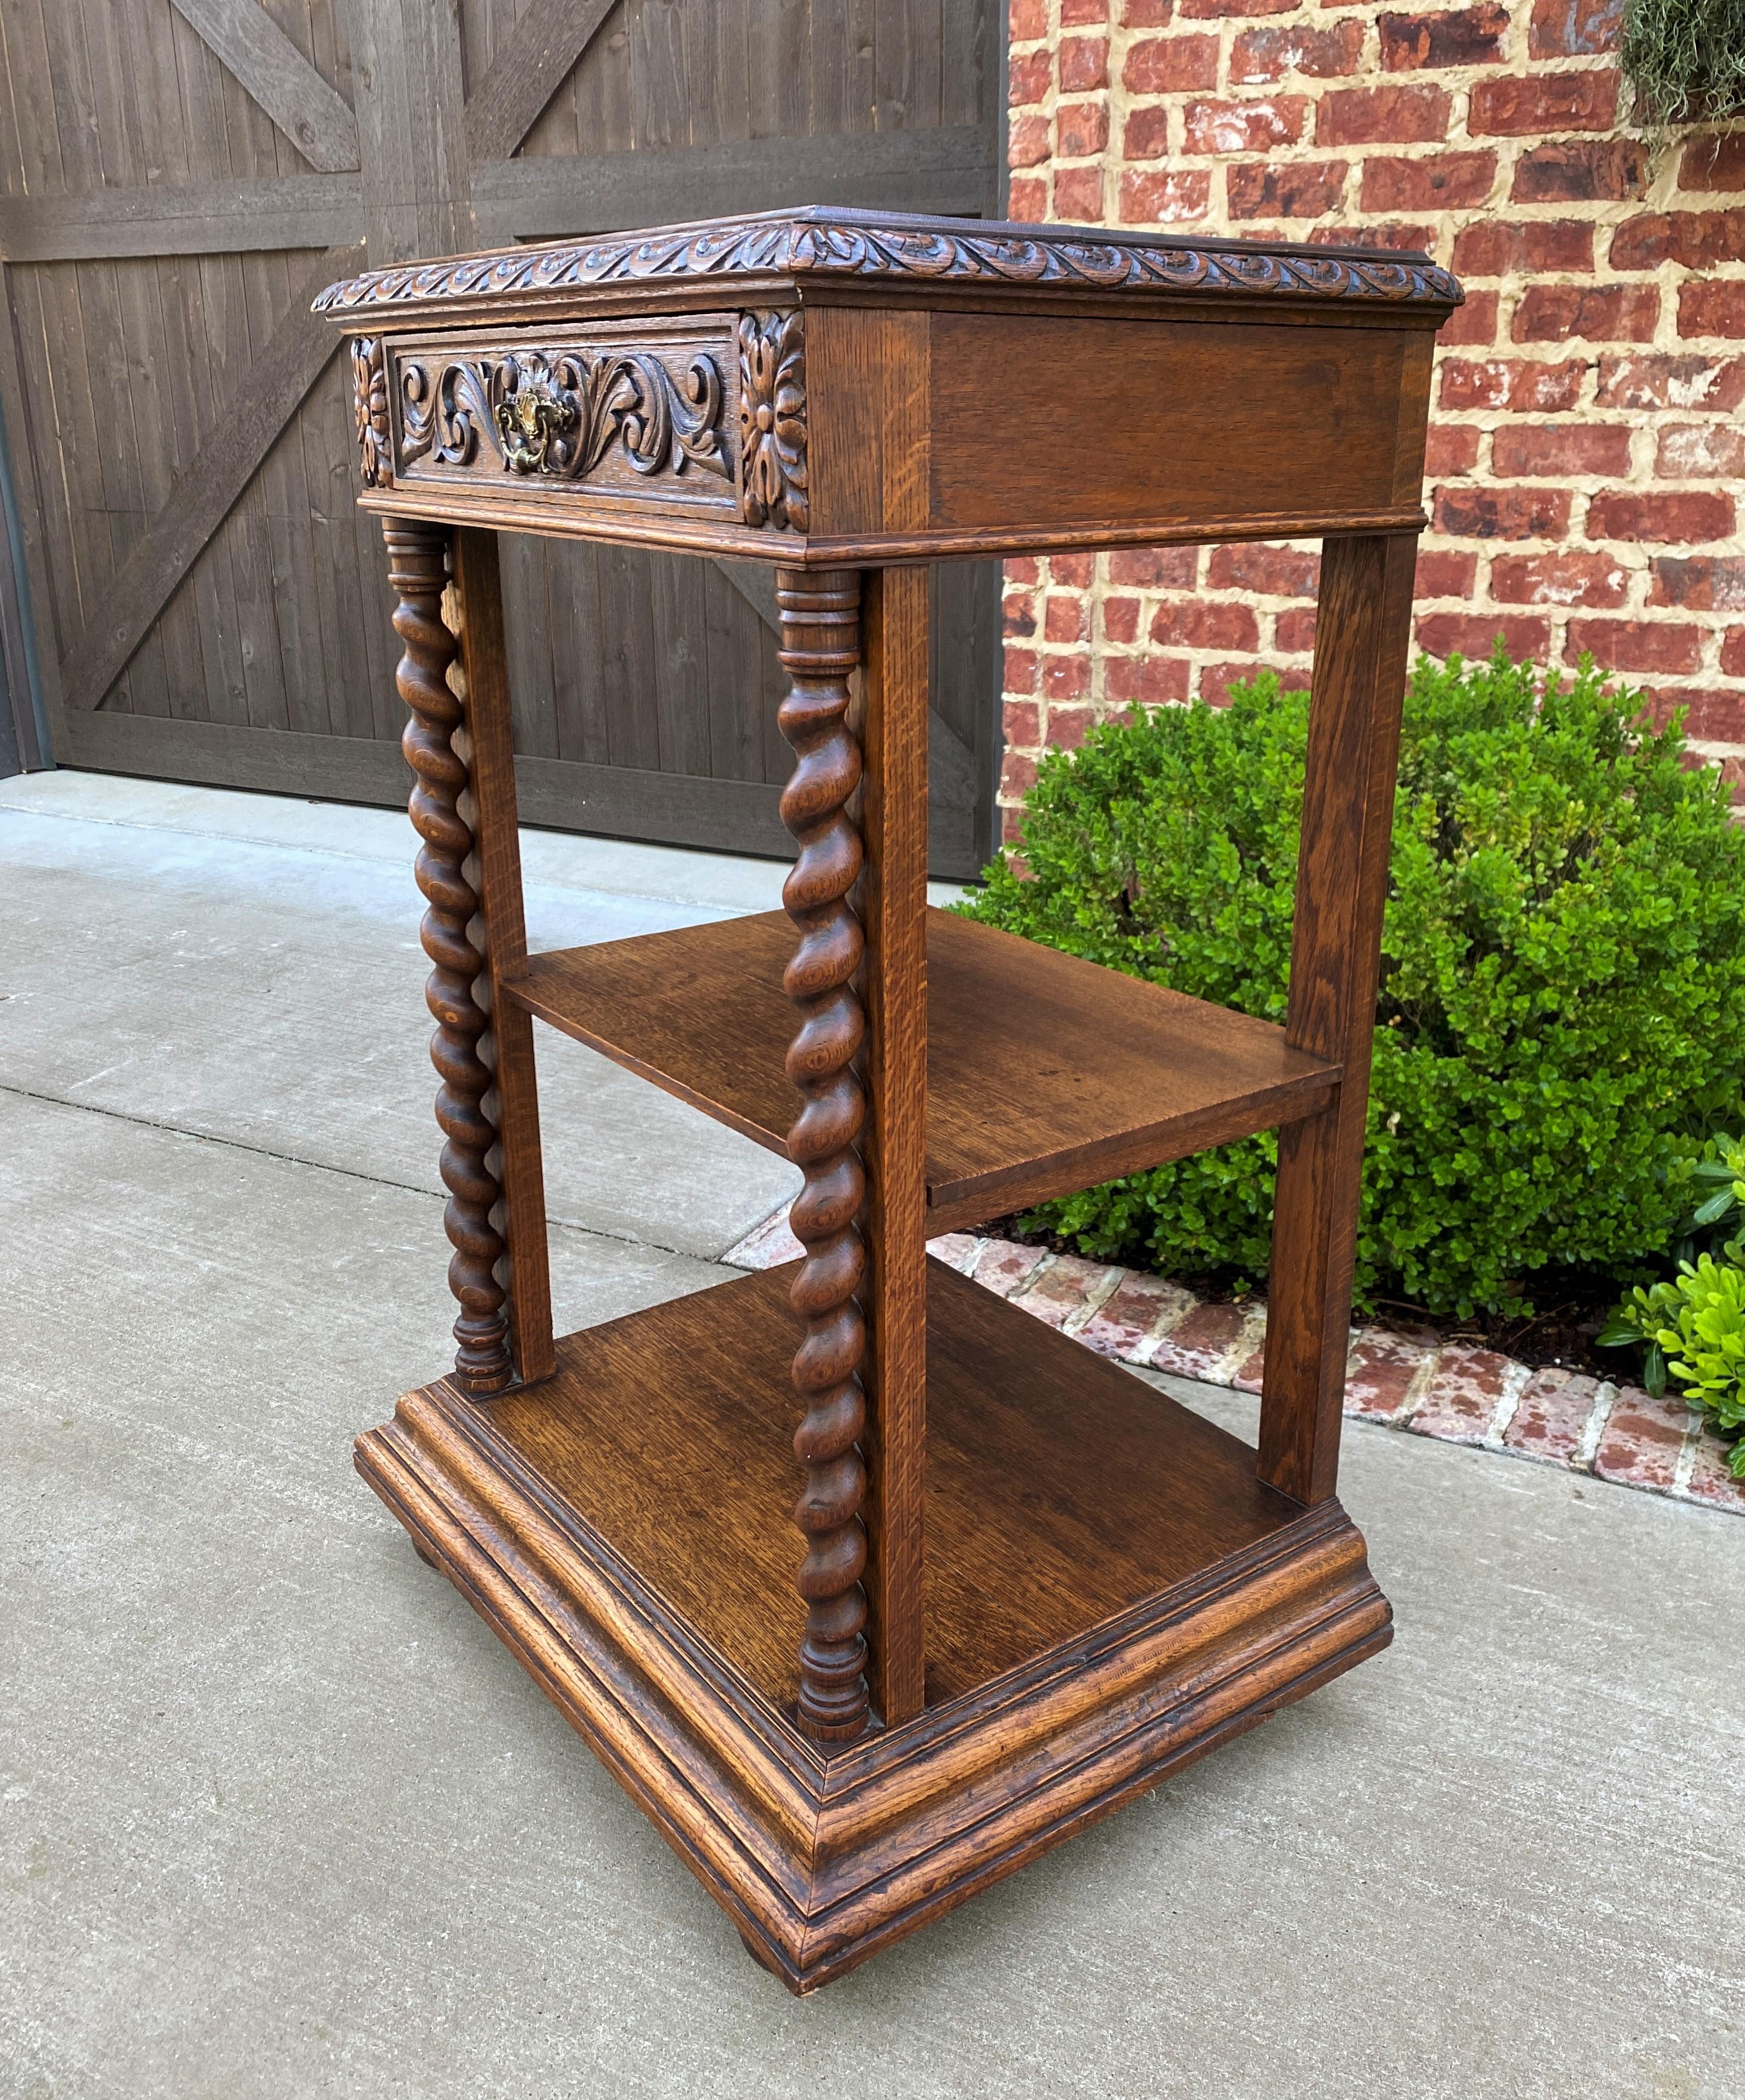 Late 19th Century Tall Antique French Server Pedestal Barley Twist Nightstand Table Drawer 19th C